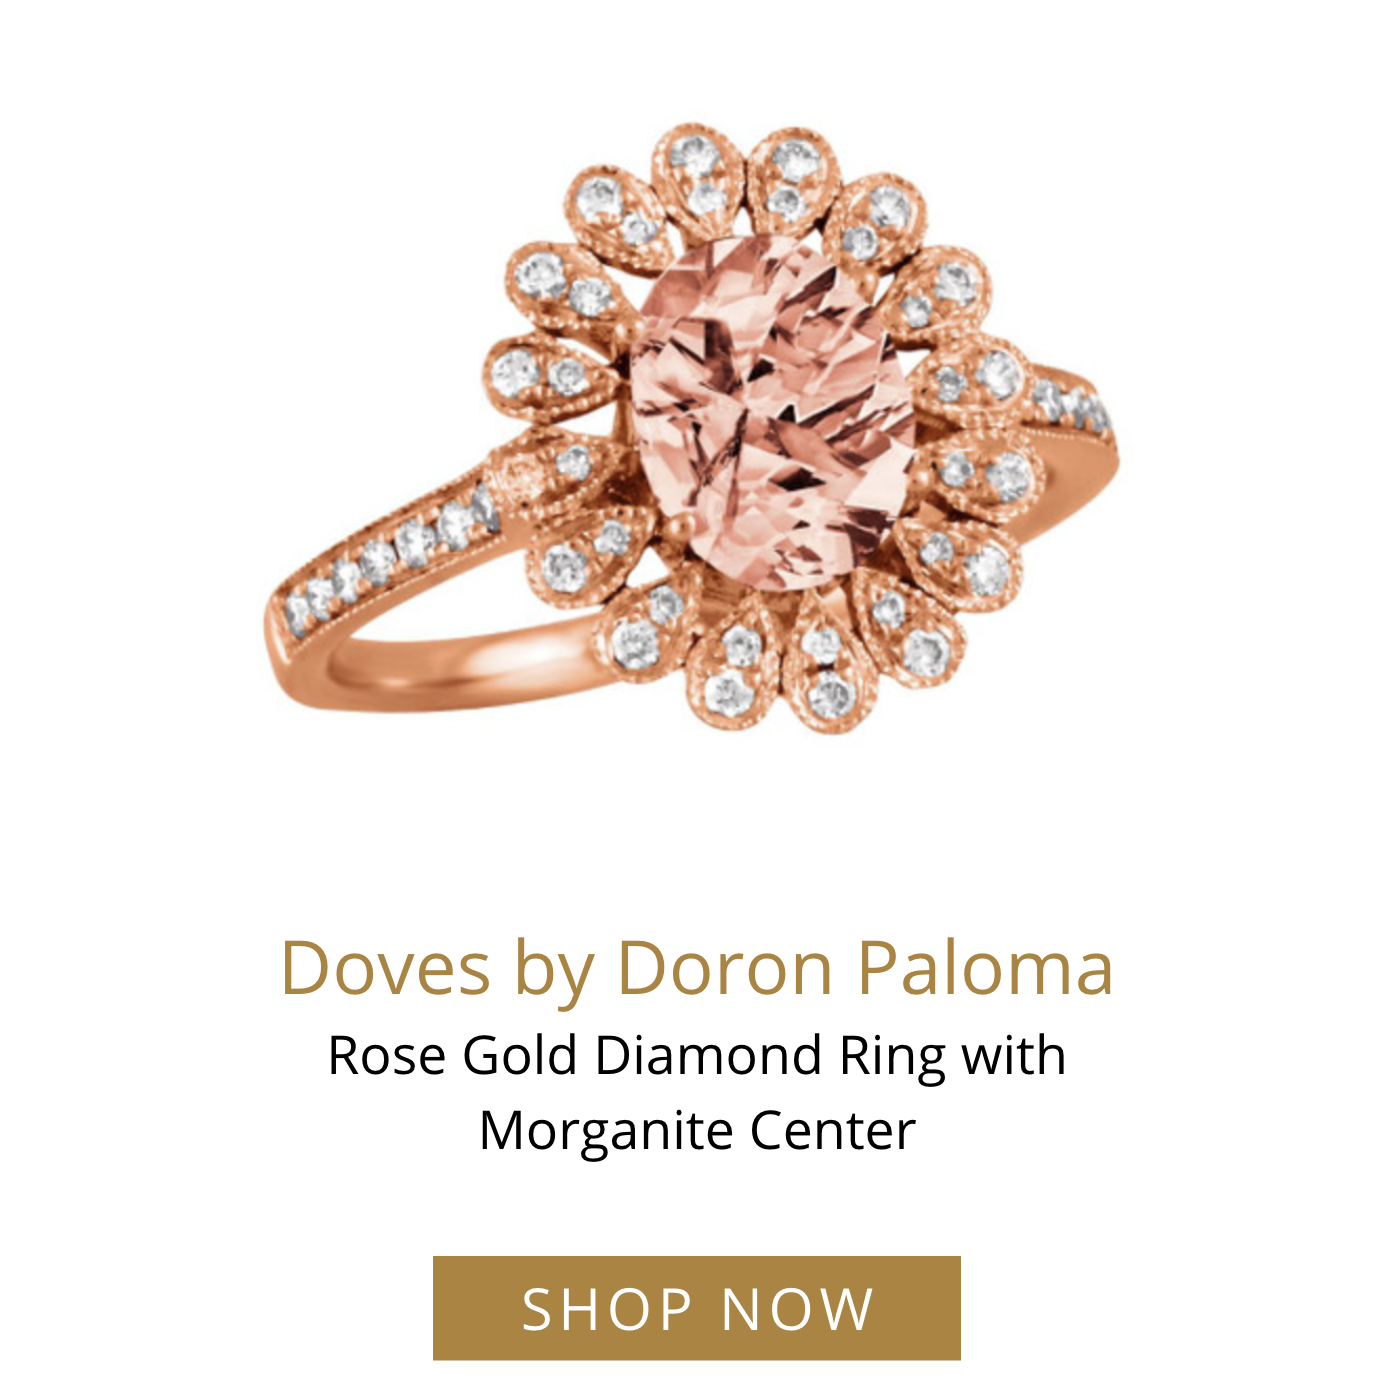 Doves by Doron Paloma Rose Gold Diamond Ring with Morganite Center